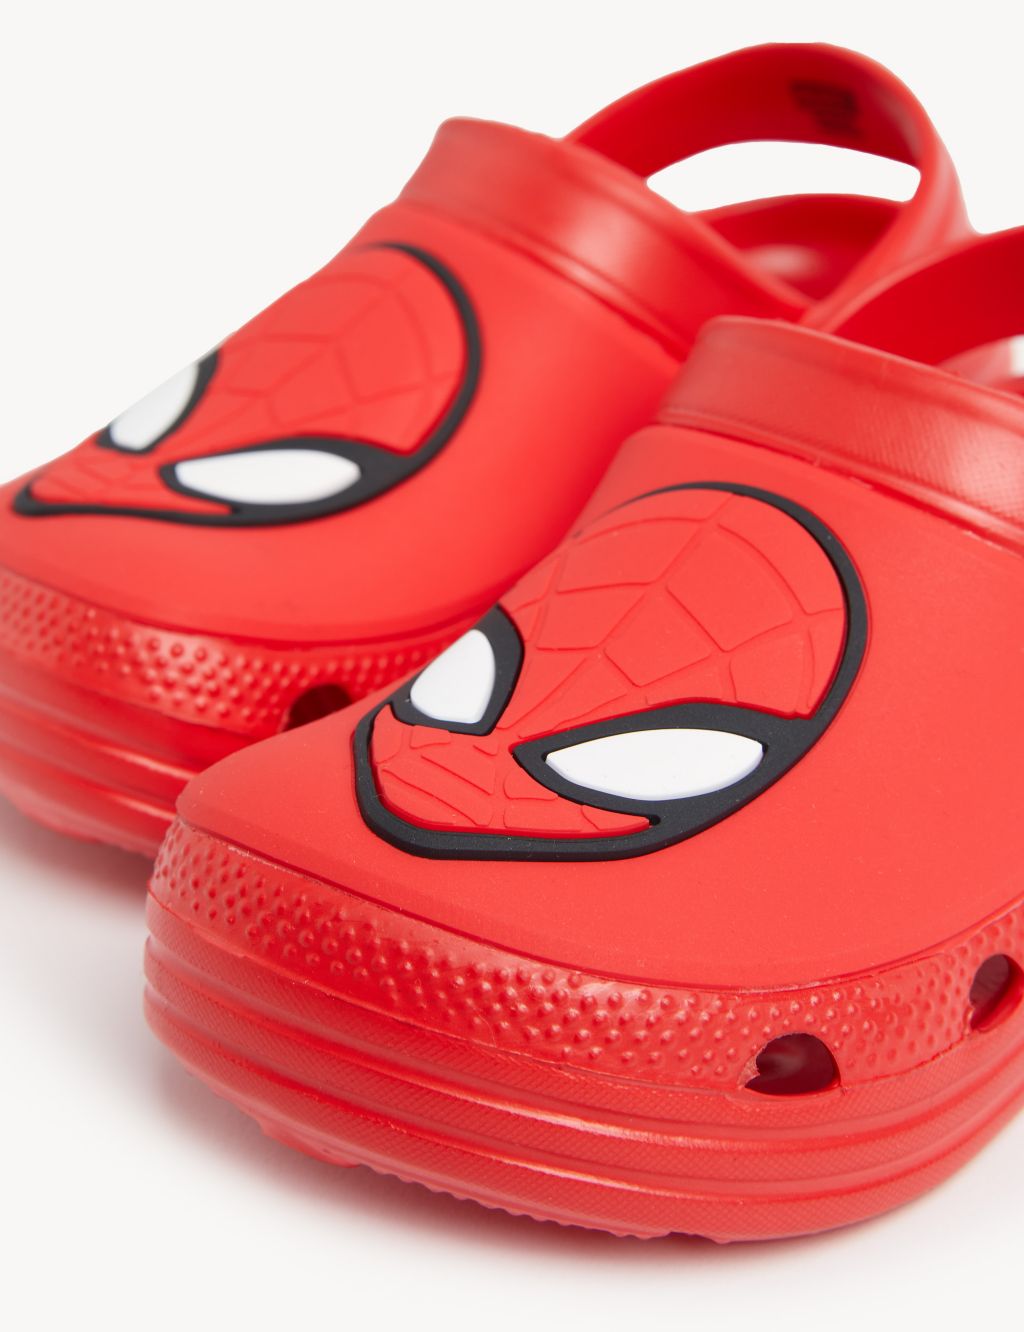 Kids' Spider-Man™ Clogs (4 Small - 13 Small) image 3